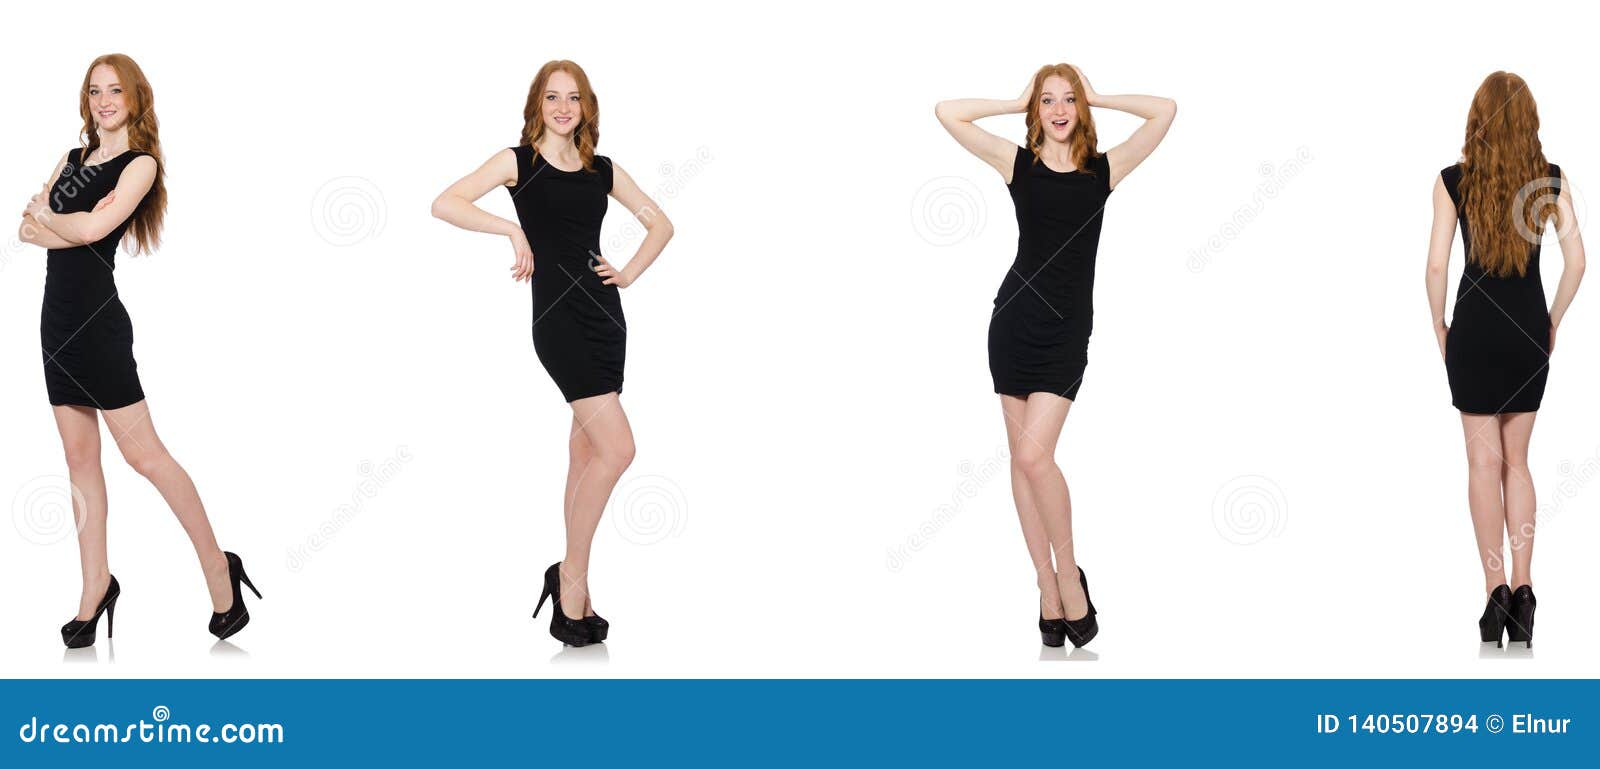 The Young Redhead Lady in Black Dress Stock Photo - Image of beautiful ...